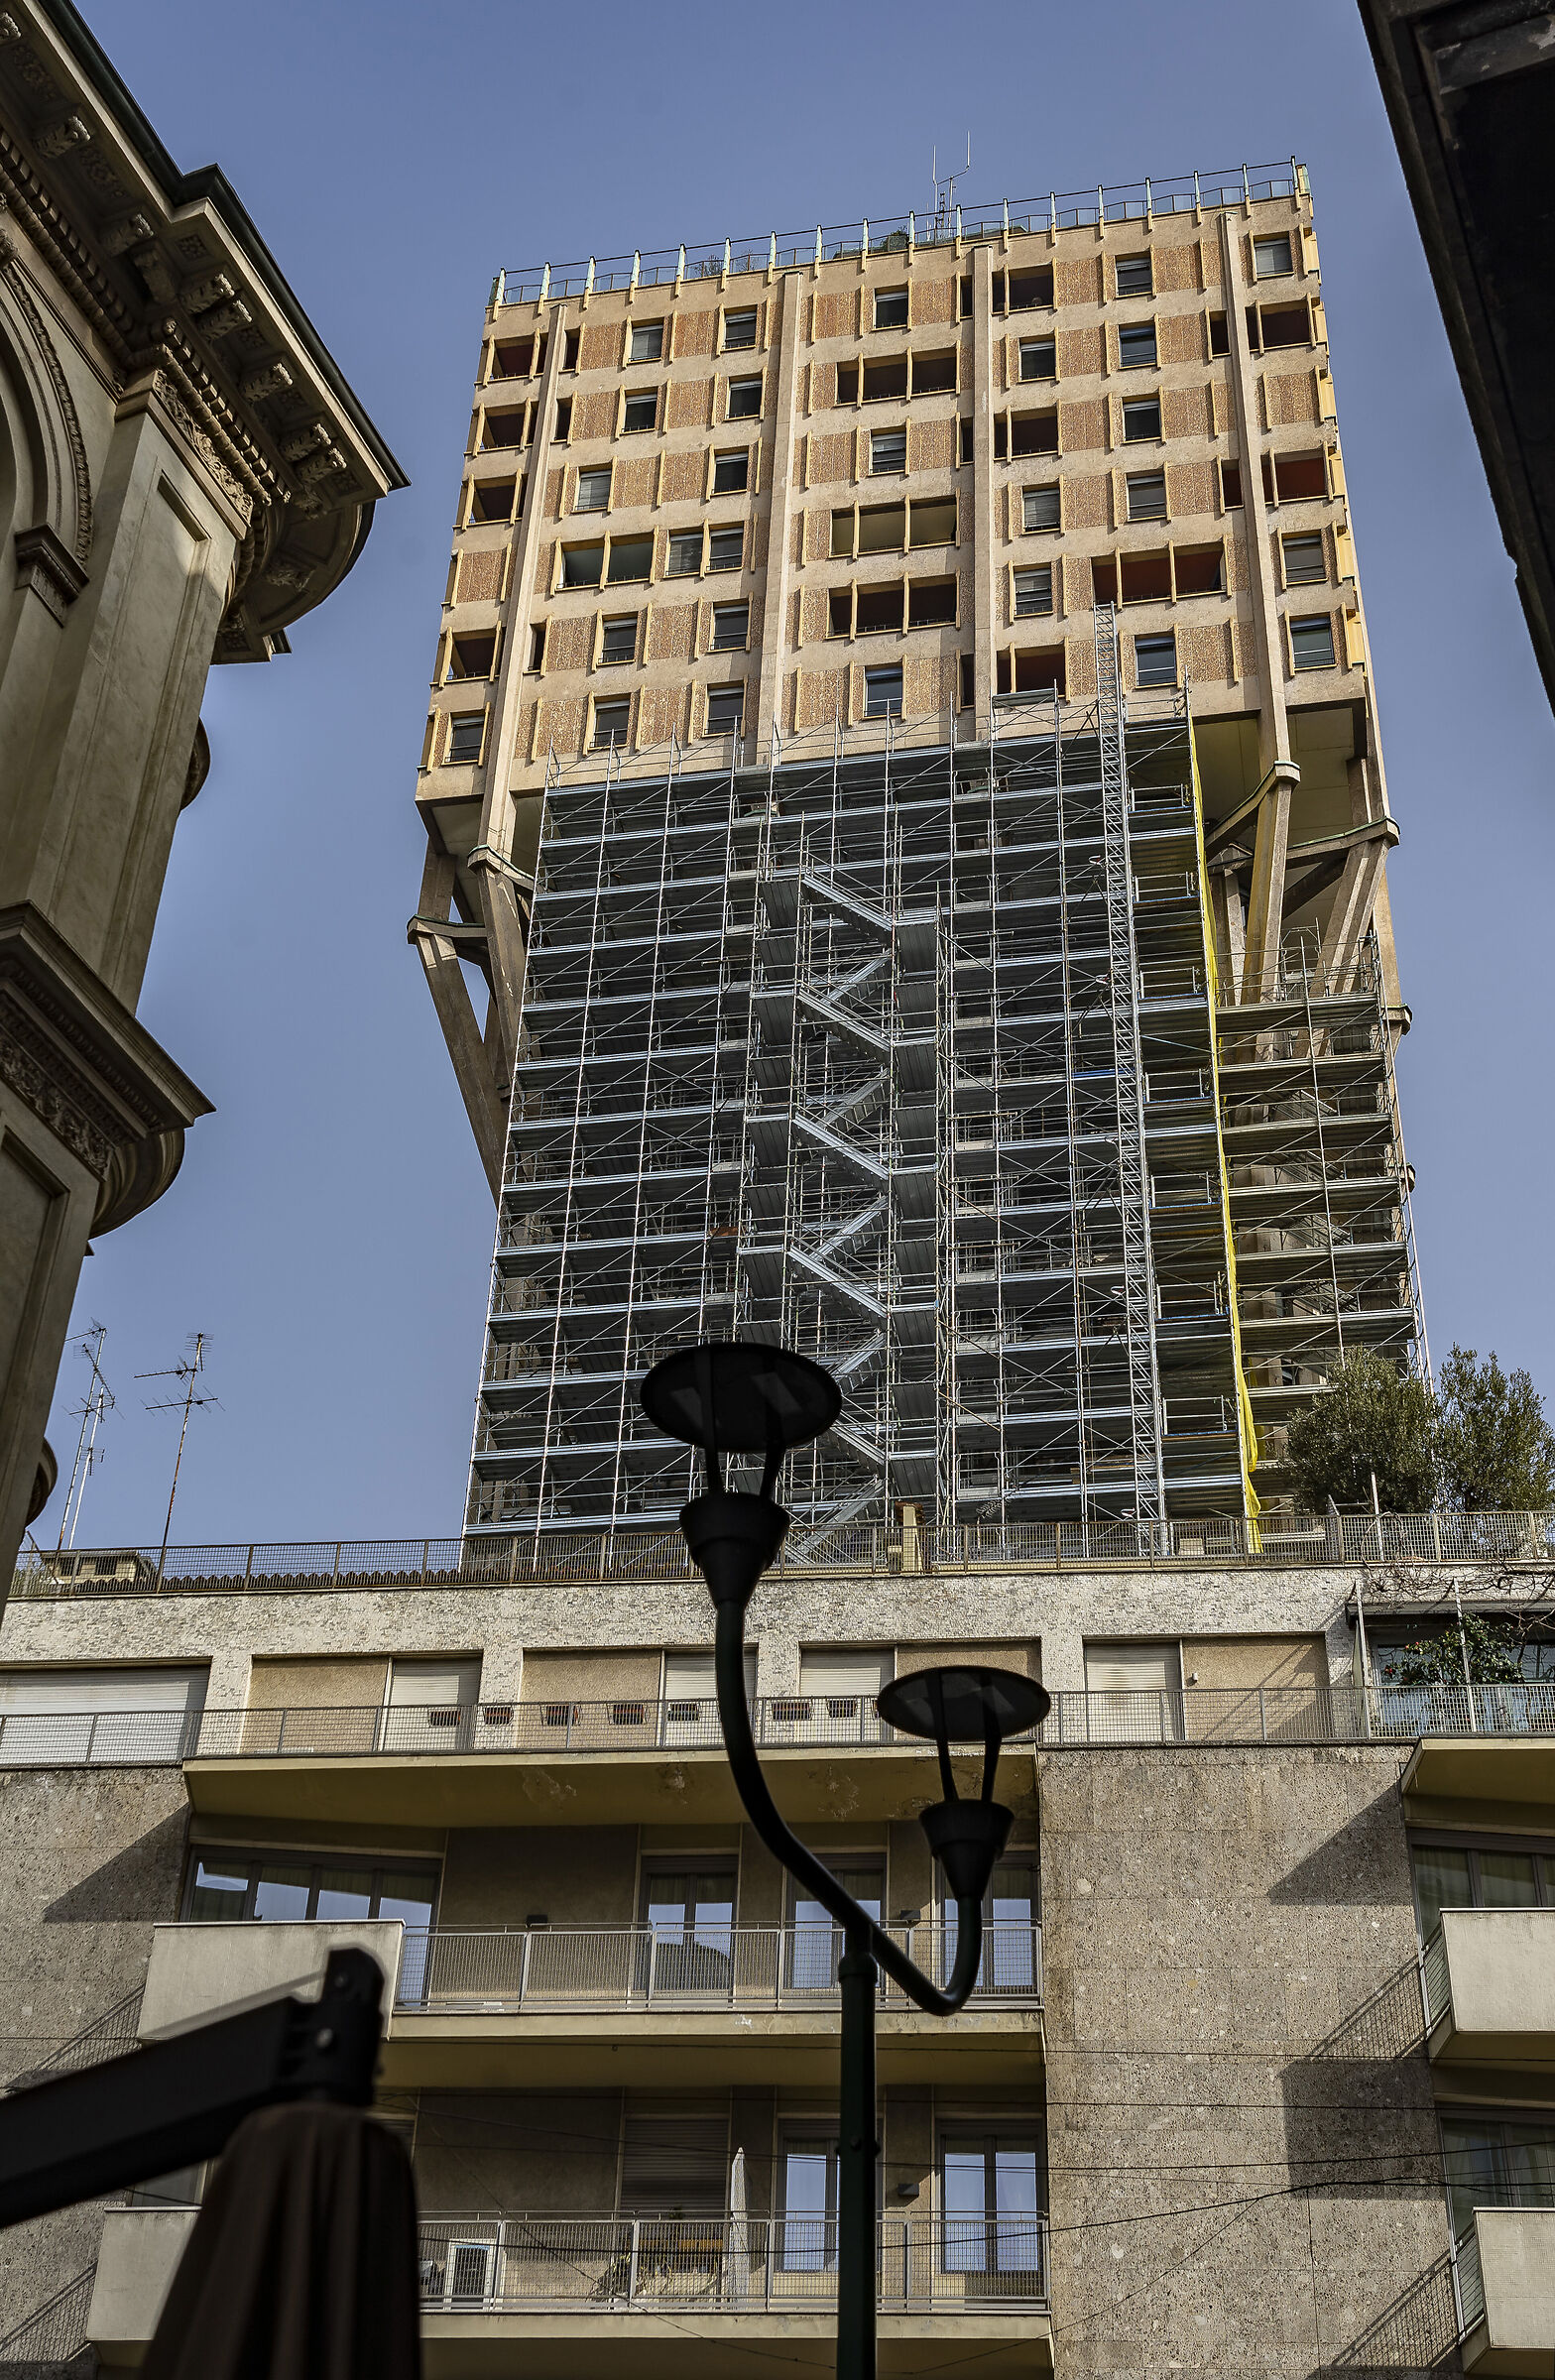 Restoration of the Velasca Tower - Tuesday 23/02/2021 11:33...